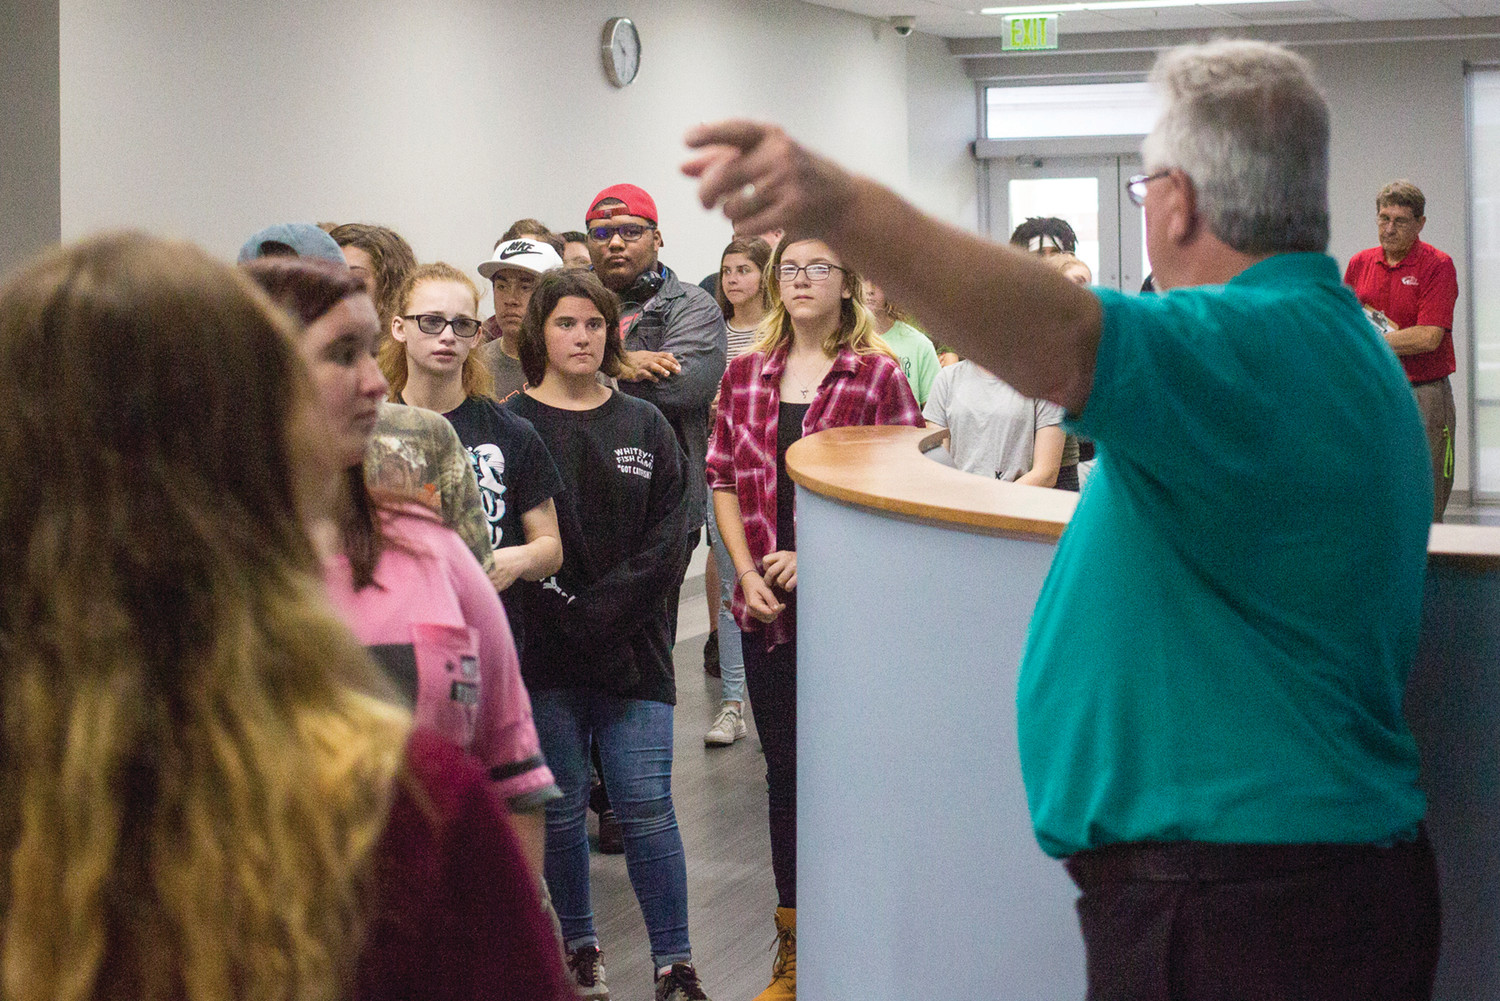 Students from Wilkinson Junior High School toured the campus at St. Johns River State College in Orange Park Tuesday as part of the college' s OP Rallies program where they bring local middle schoolers in to see what the campus offers to high schoolers.